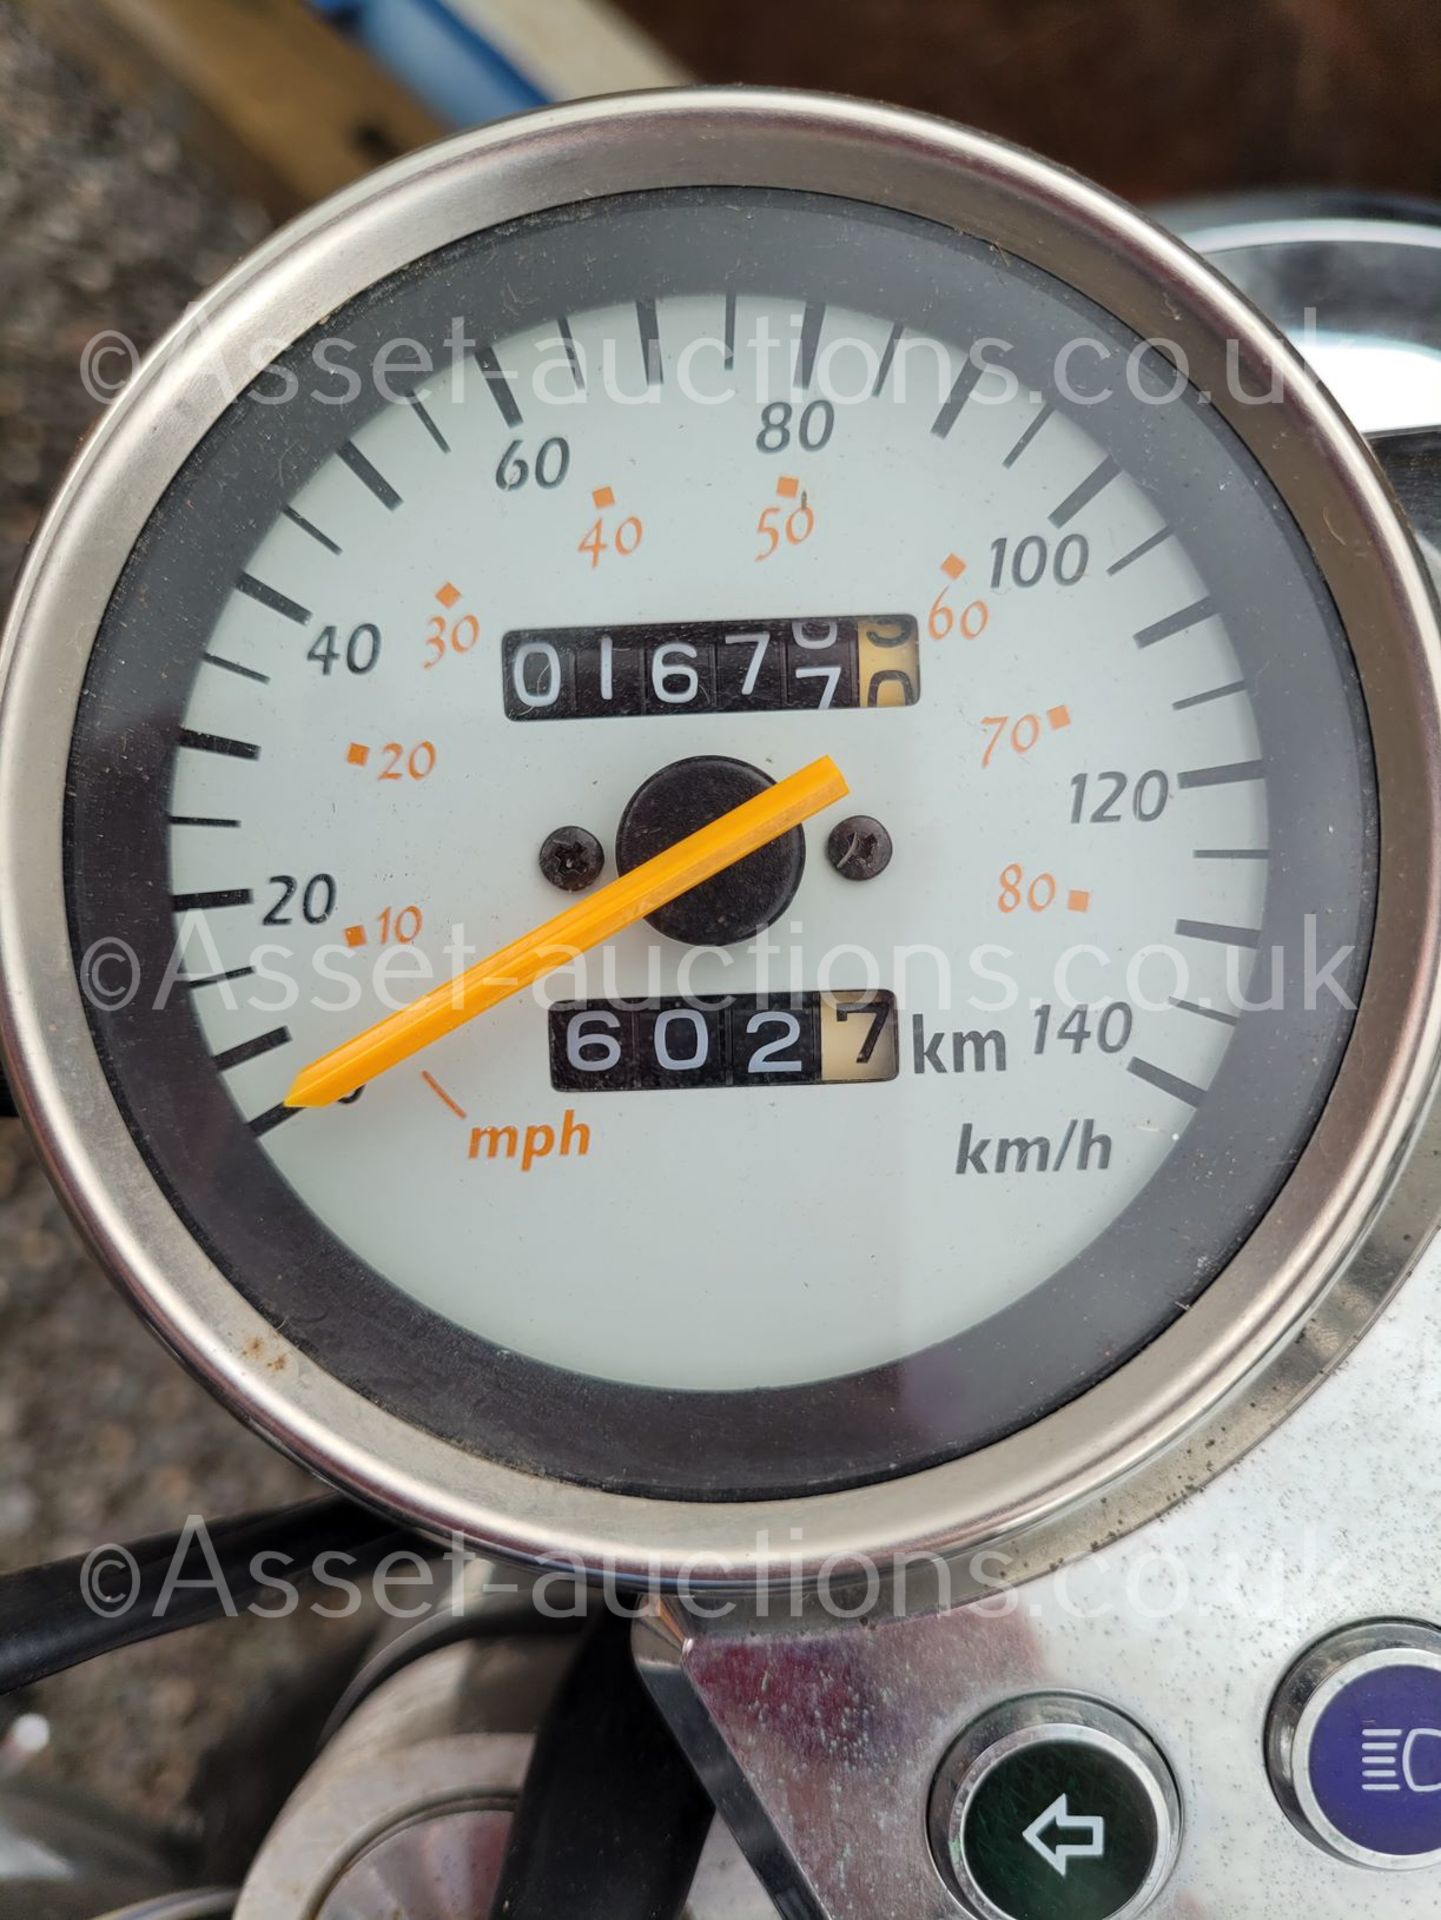 HYOSUNG AQUILA V-TWIN 125CC ONLY 1677 MILES, VERY LOW MILEAGE IN GOOD CONDITION WITH LIKE NEW TYRES - Image 4 of 4